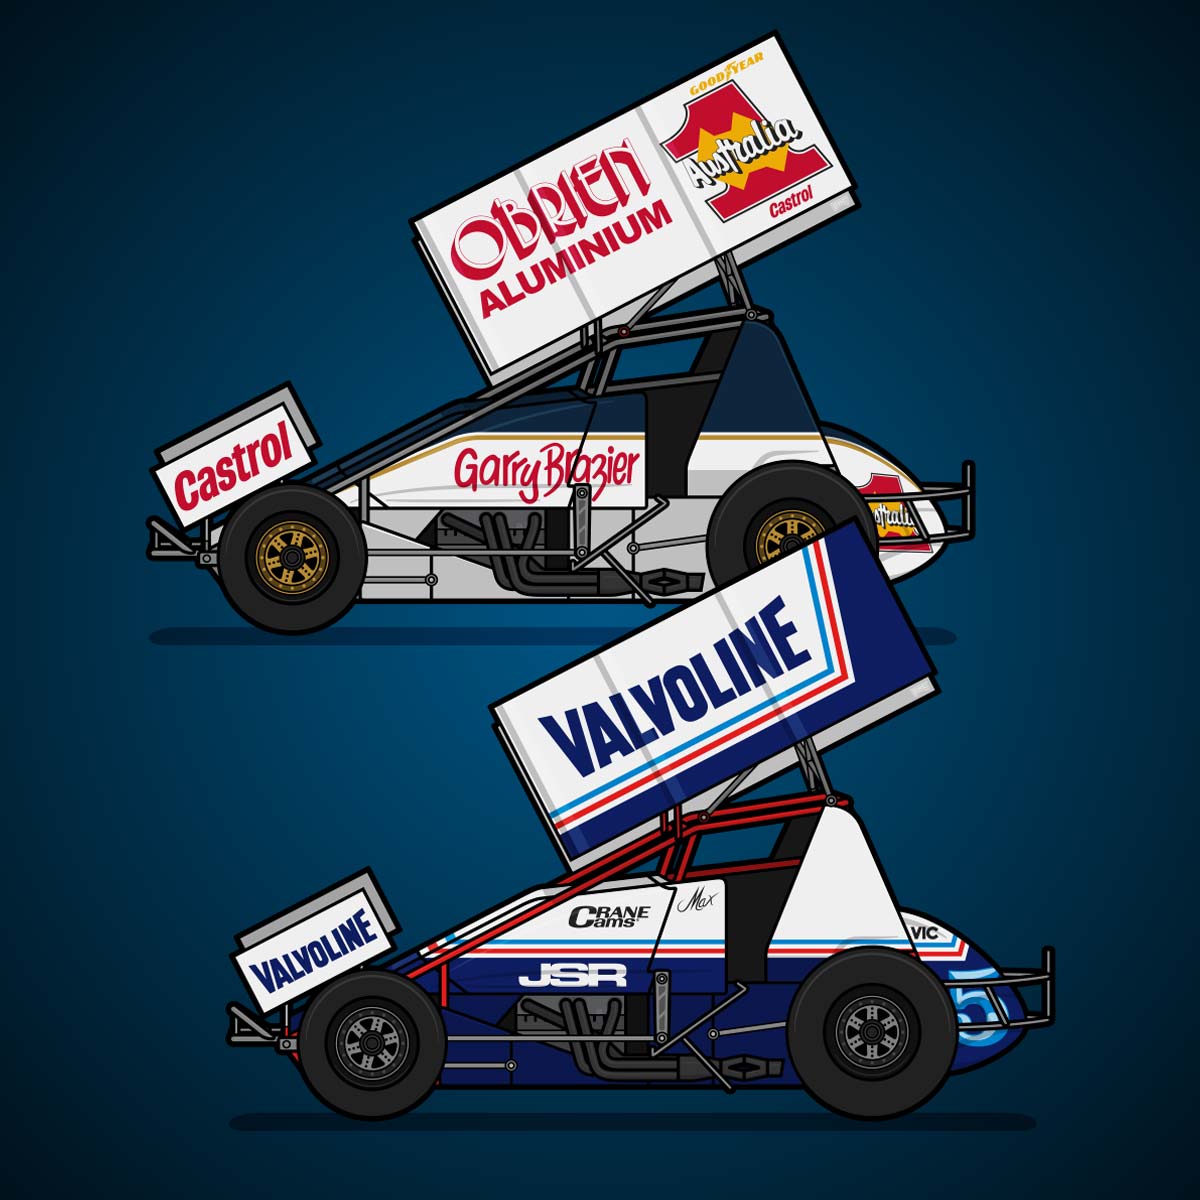 Preview of Garry Brazier and Max Dumesny 410 Sprintcars.